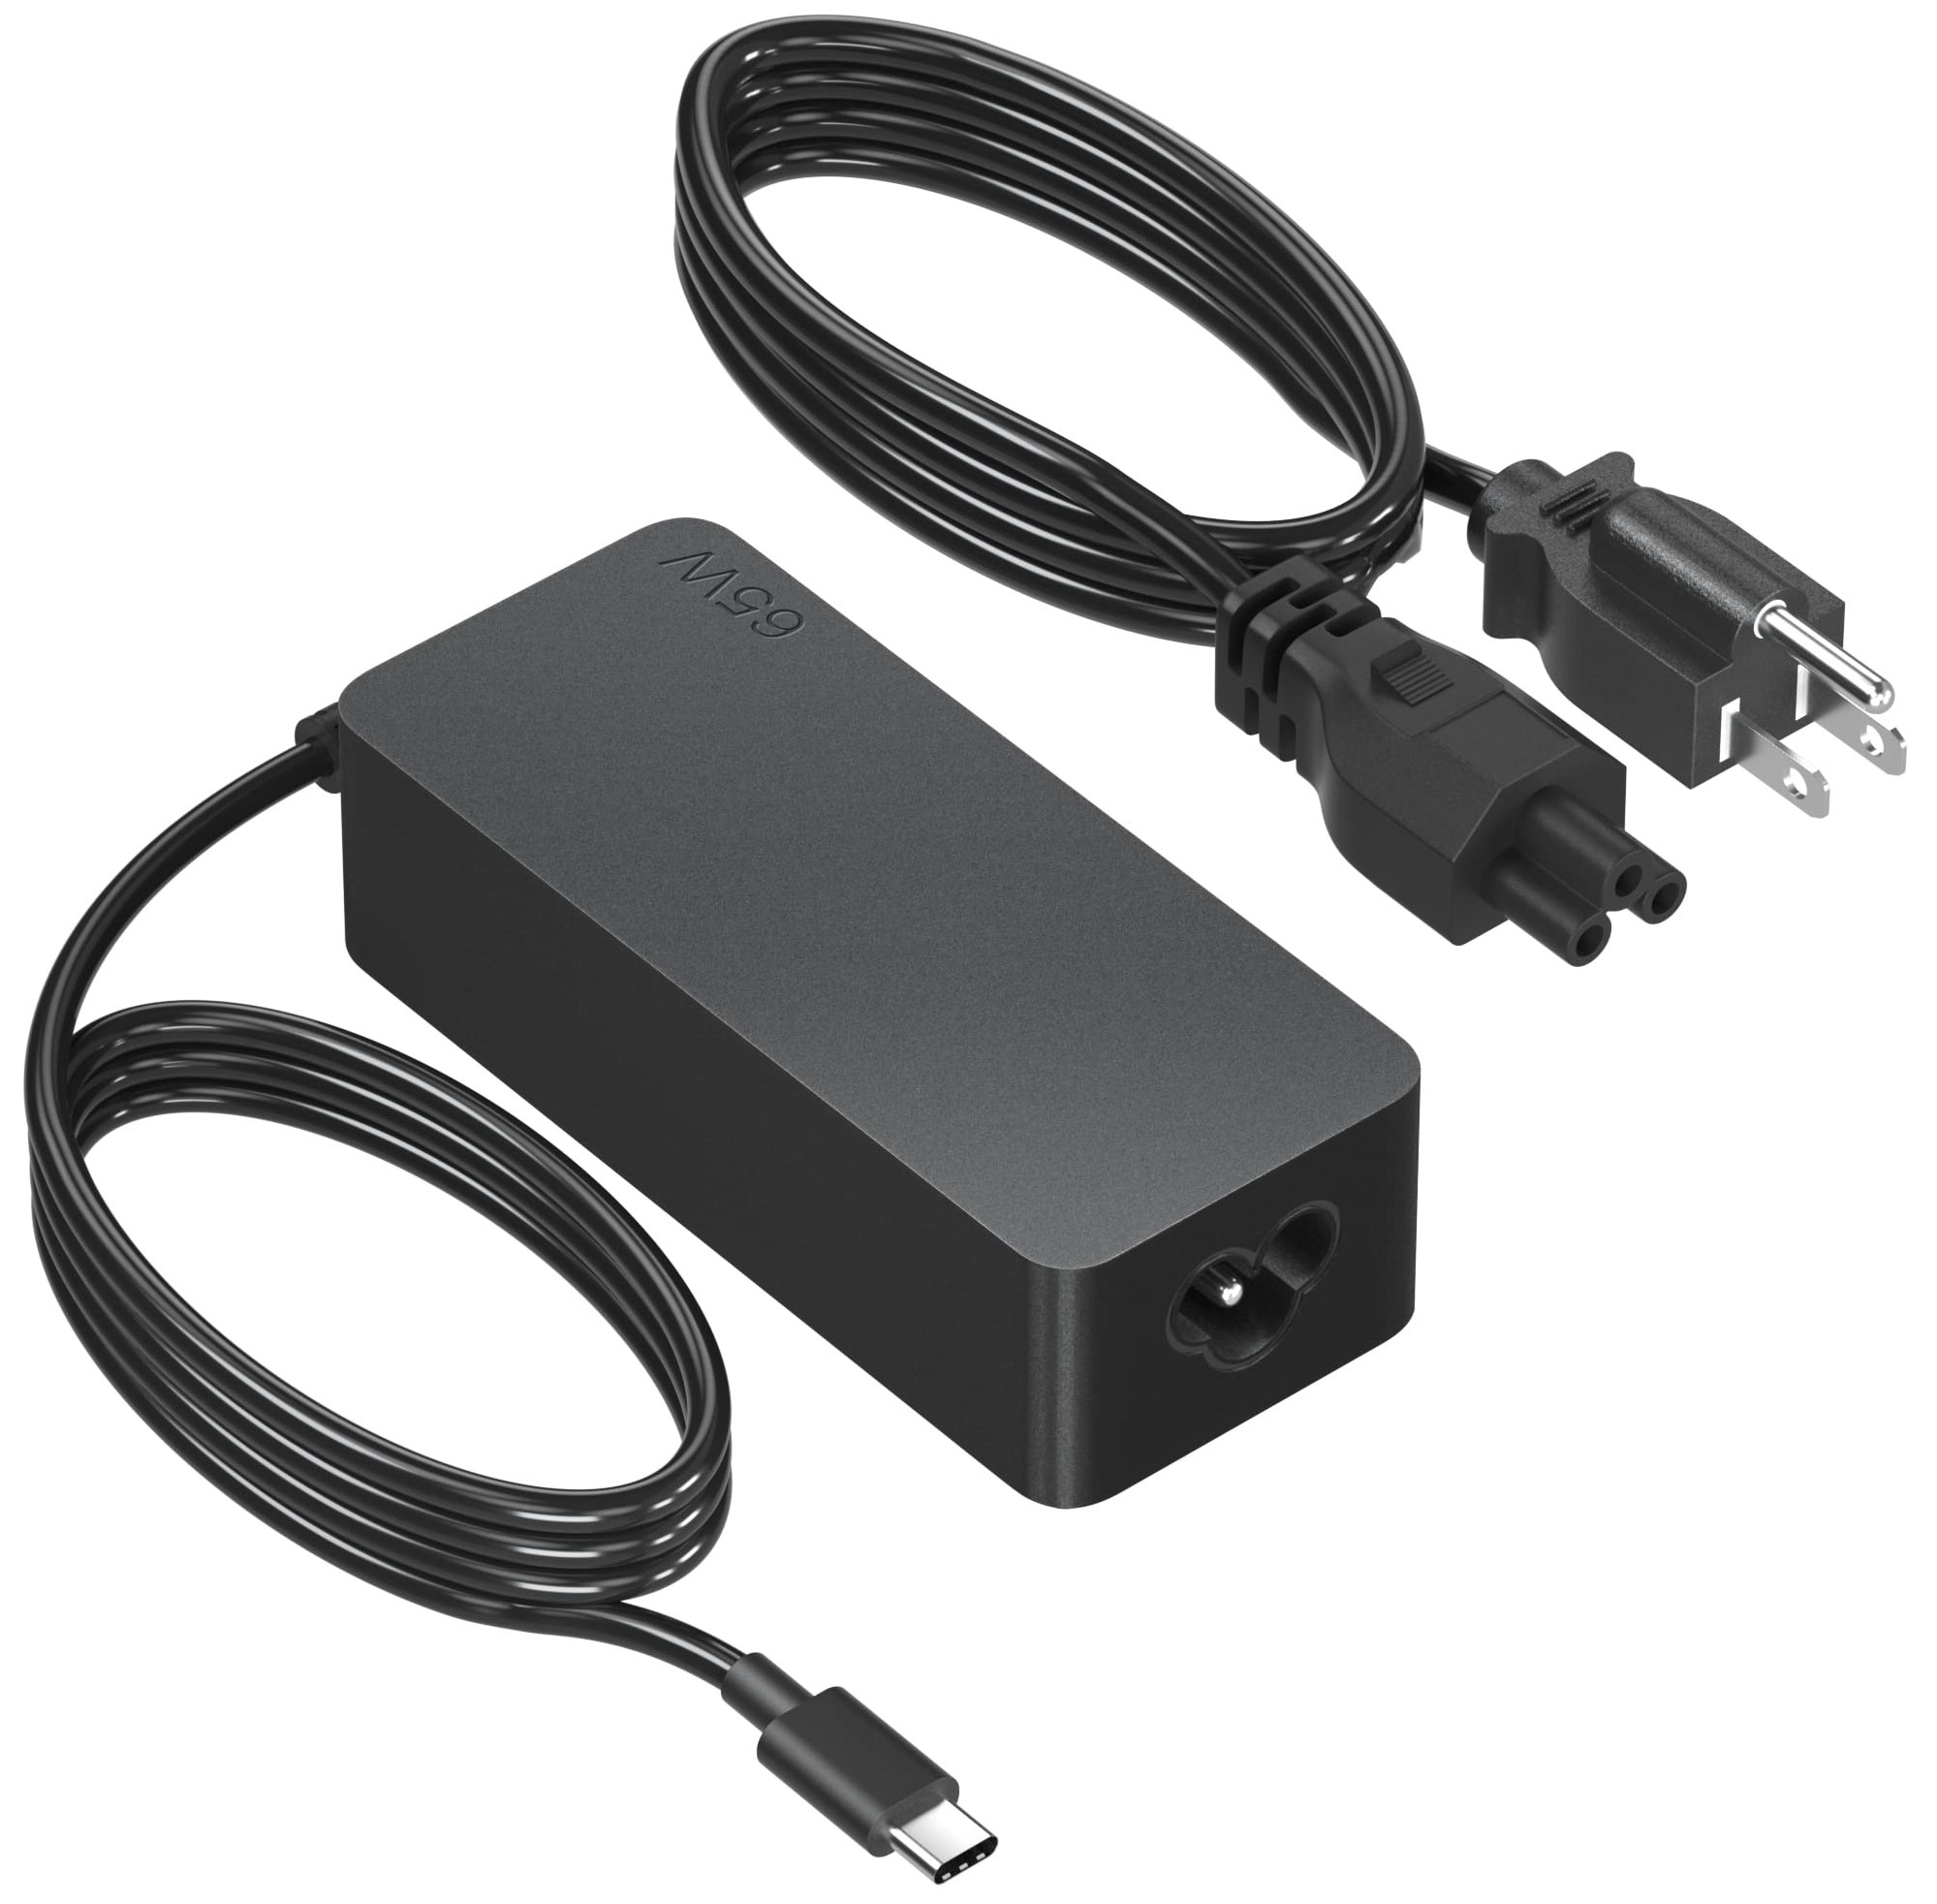 Top 5 Best Charger Adapters For Lenovo